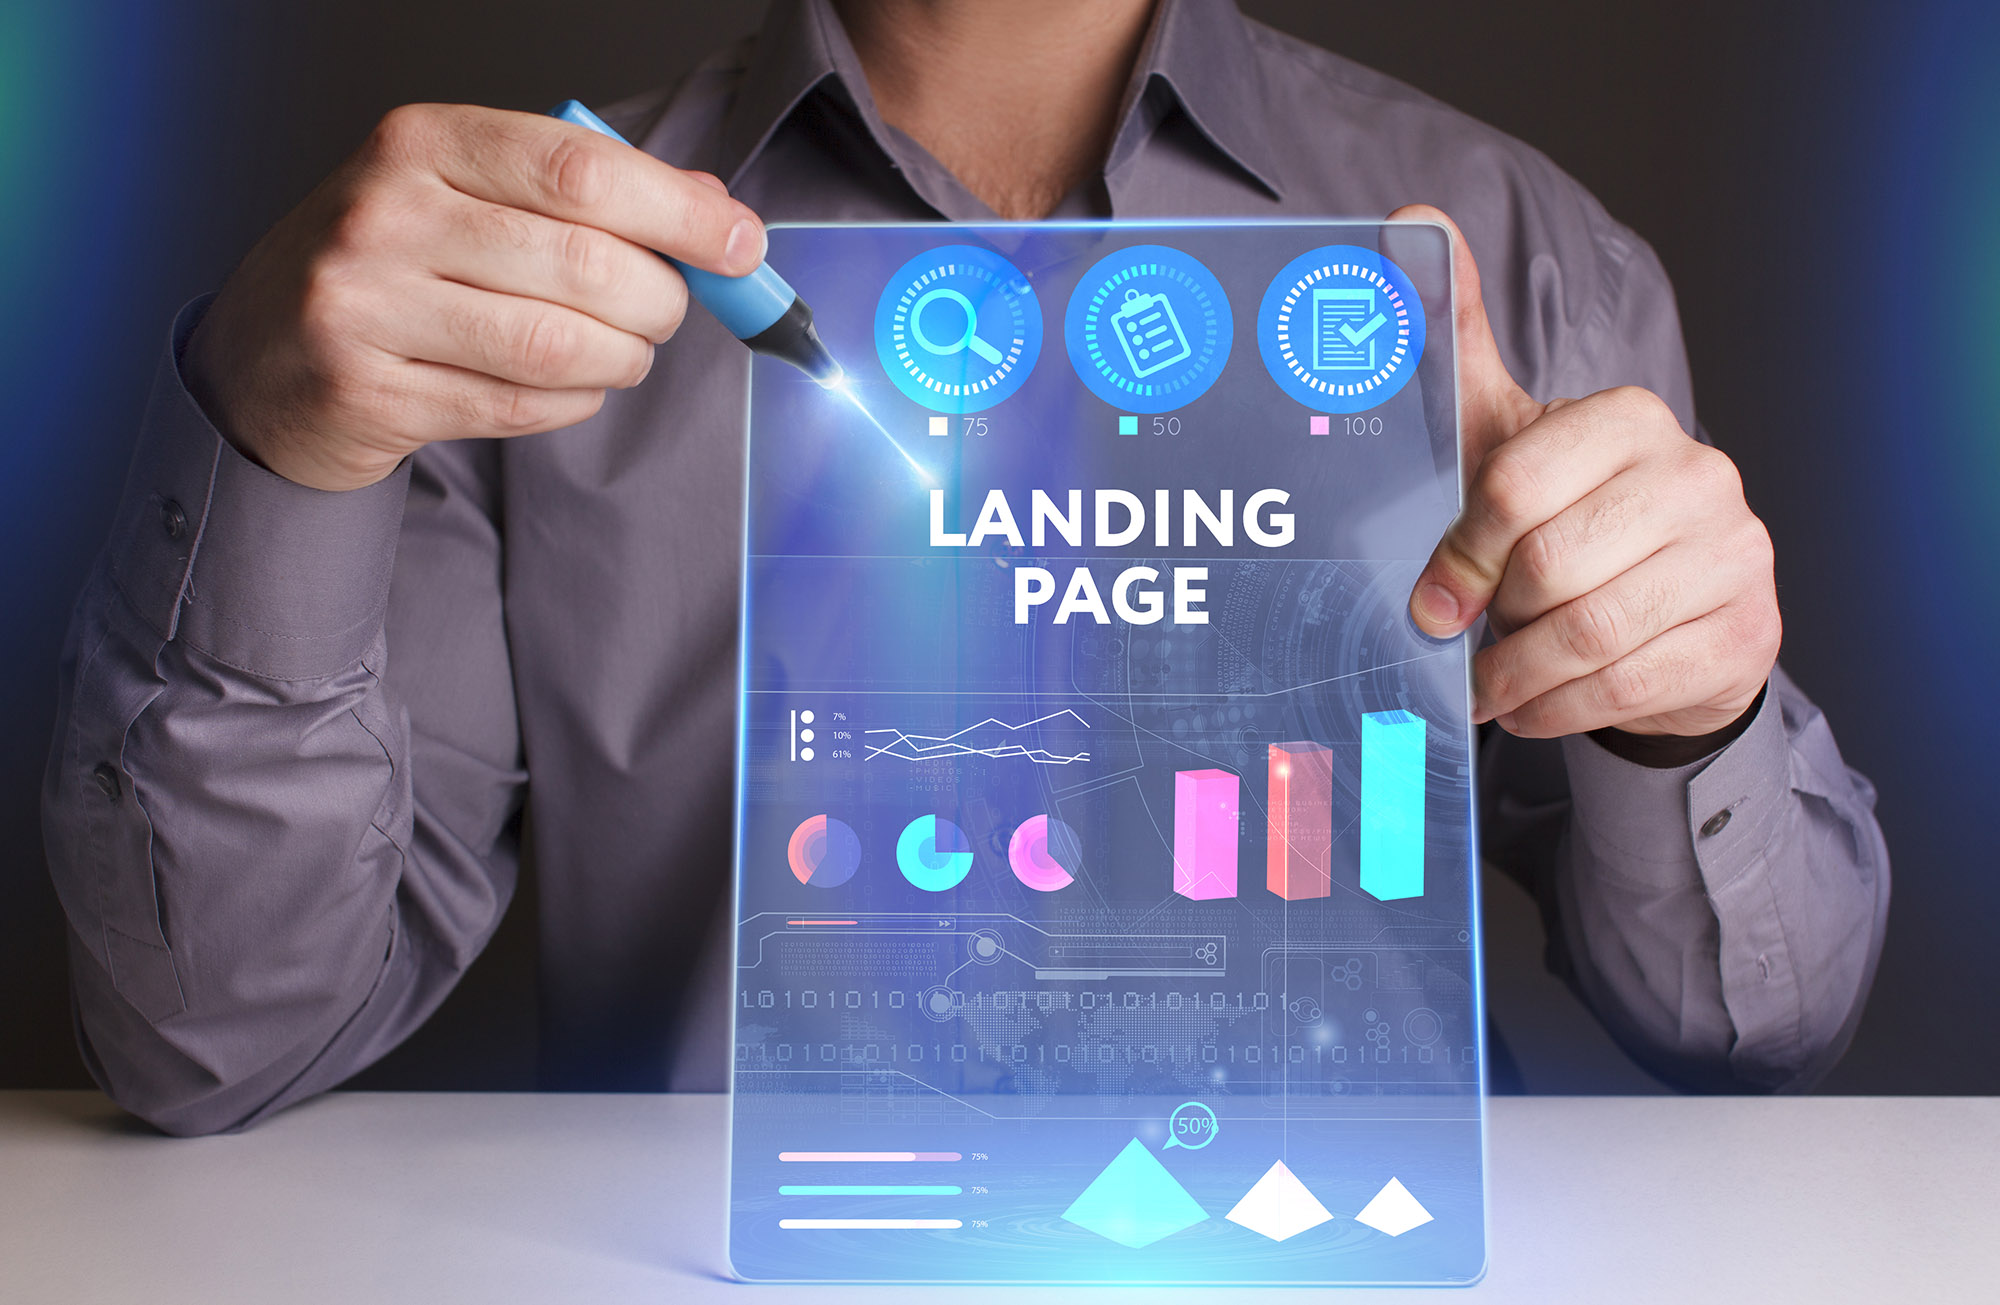 Chapter 2: Understanding the Basics: What Makes a Landing Page Effective